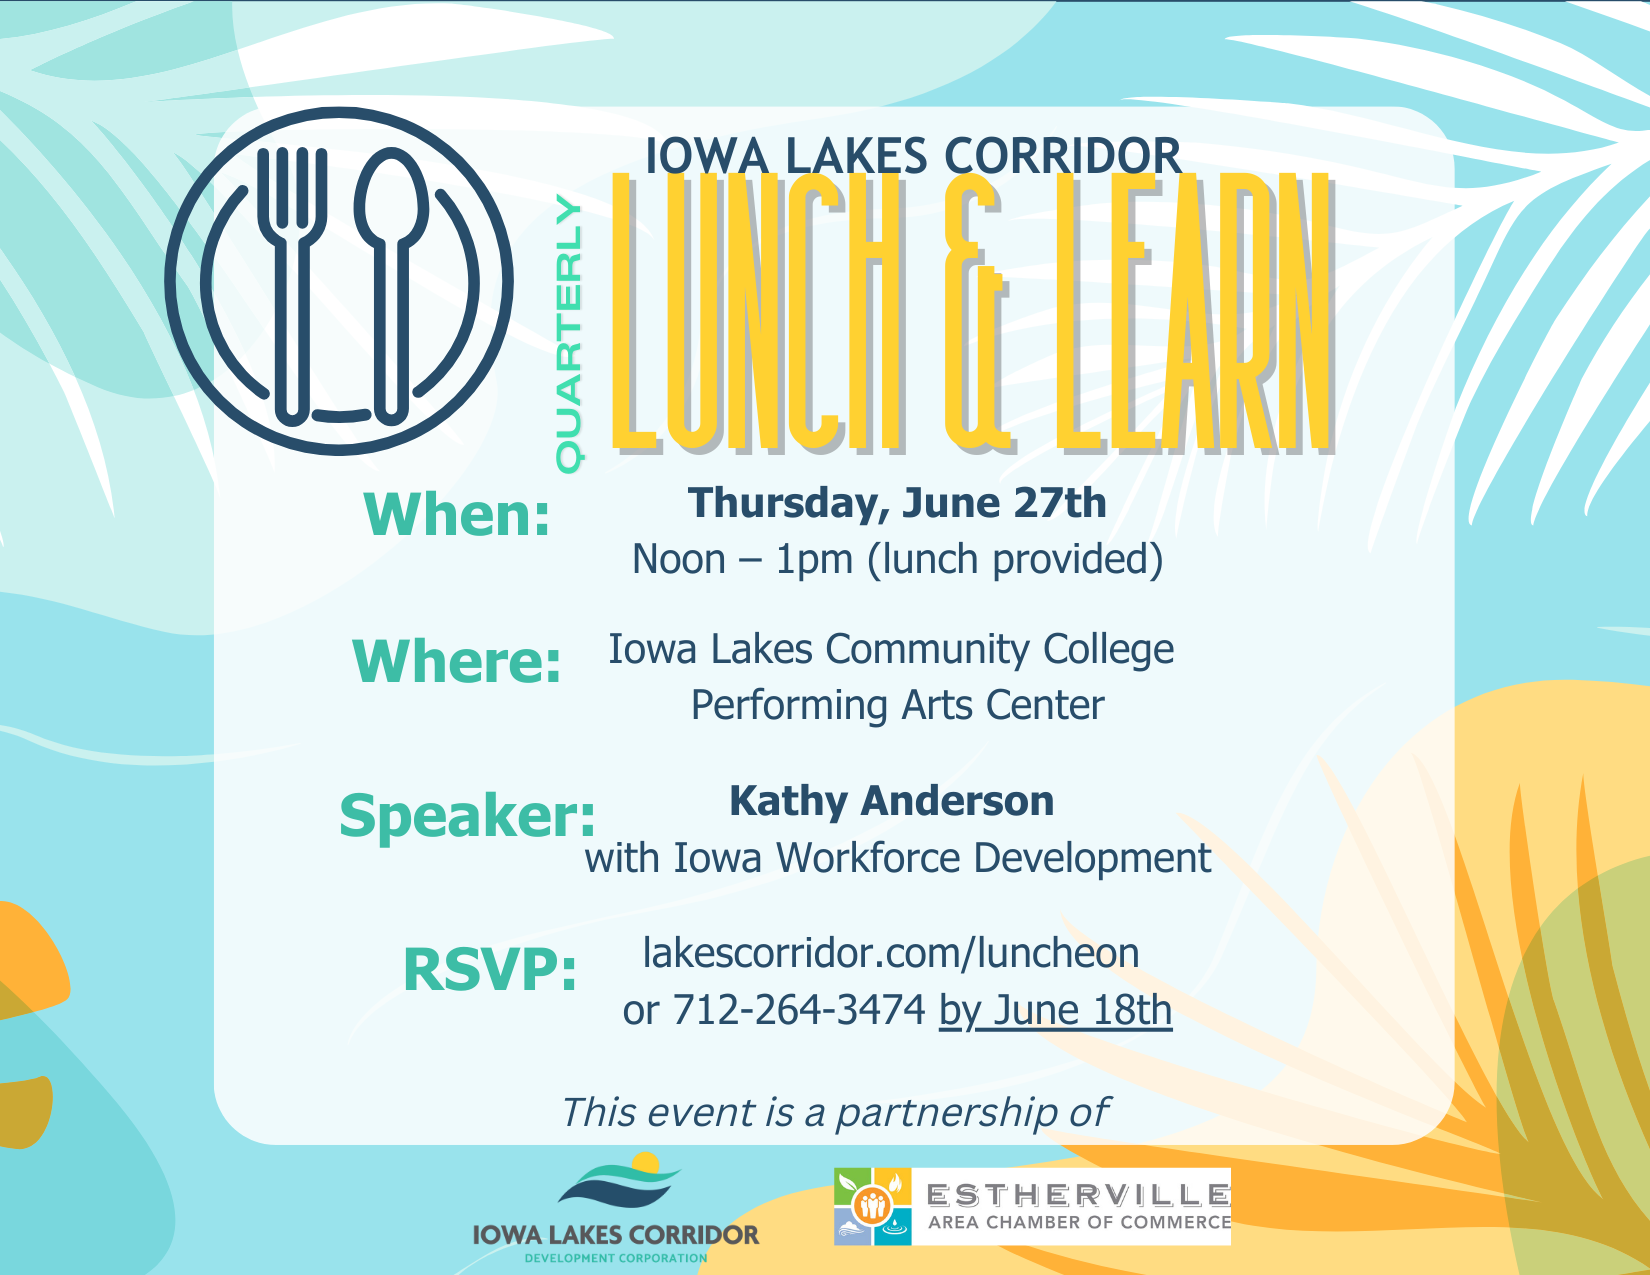 Corridor to host Workforce Lunch & Learn in partnership with the Estherville Chamber Main Photo